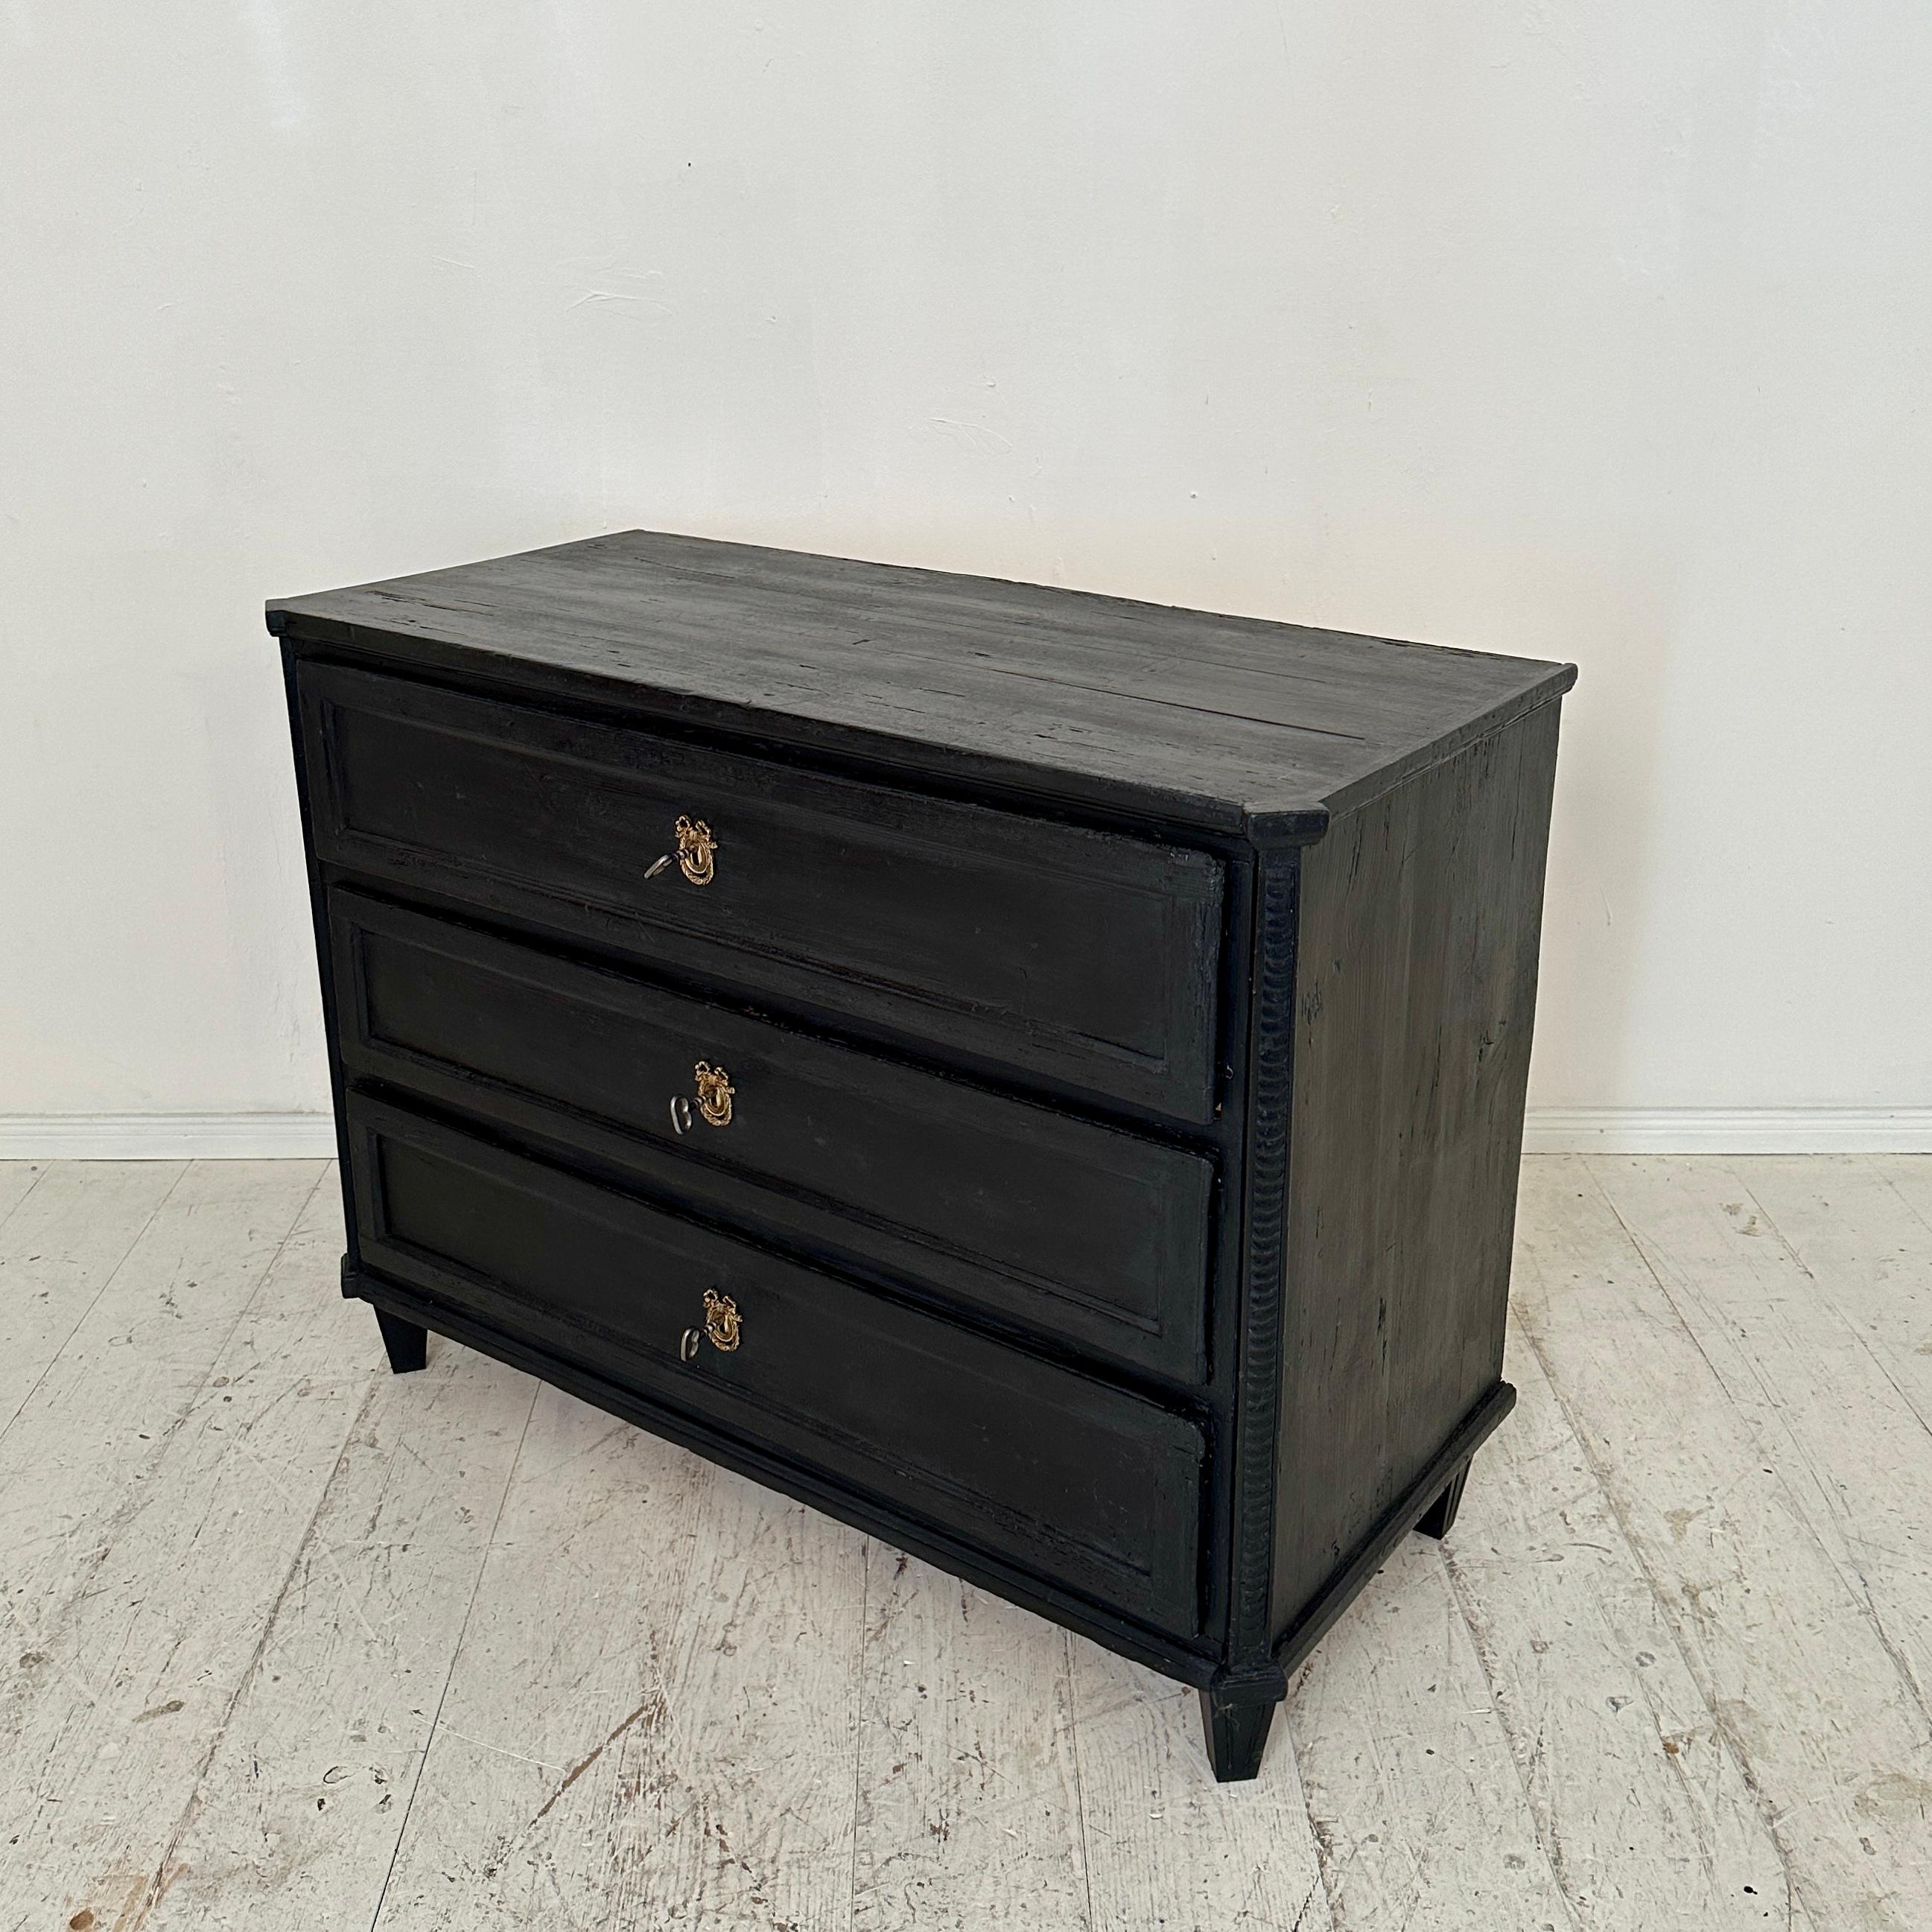 Early 19th Century Black Empire Chest of Drawers with 3 Drawers, around 1800 For Sale 3